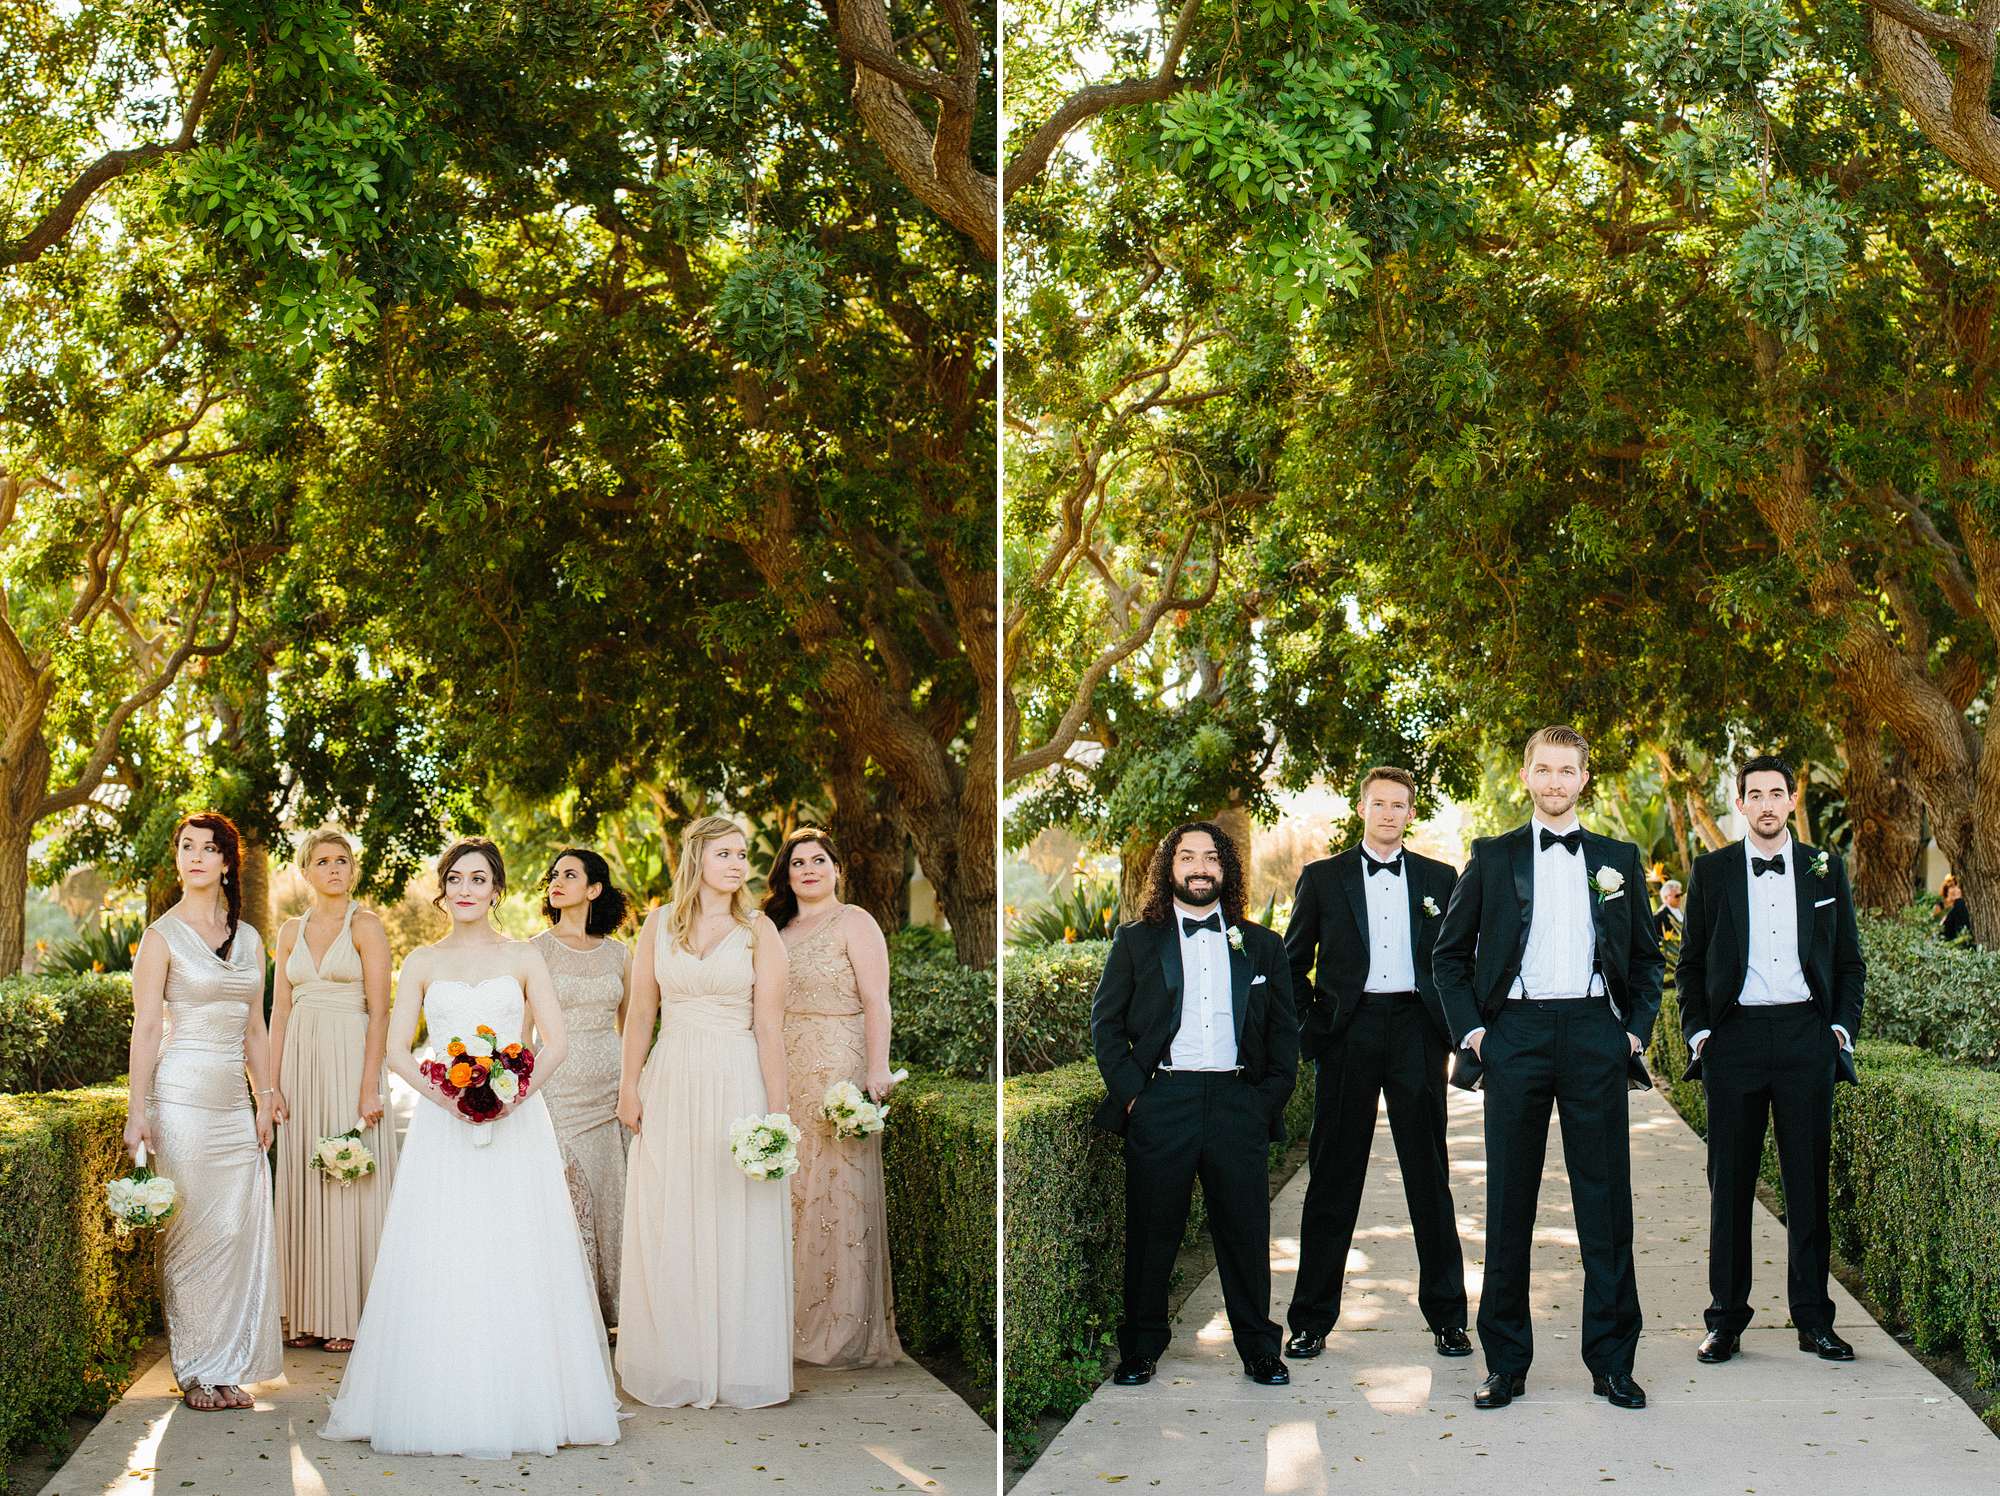 Photos of the bride and bridesmaids and groom and groomsmen. 